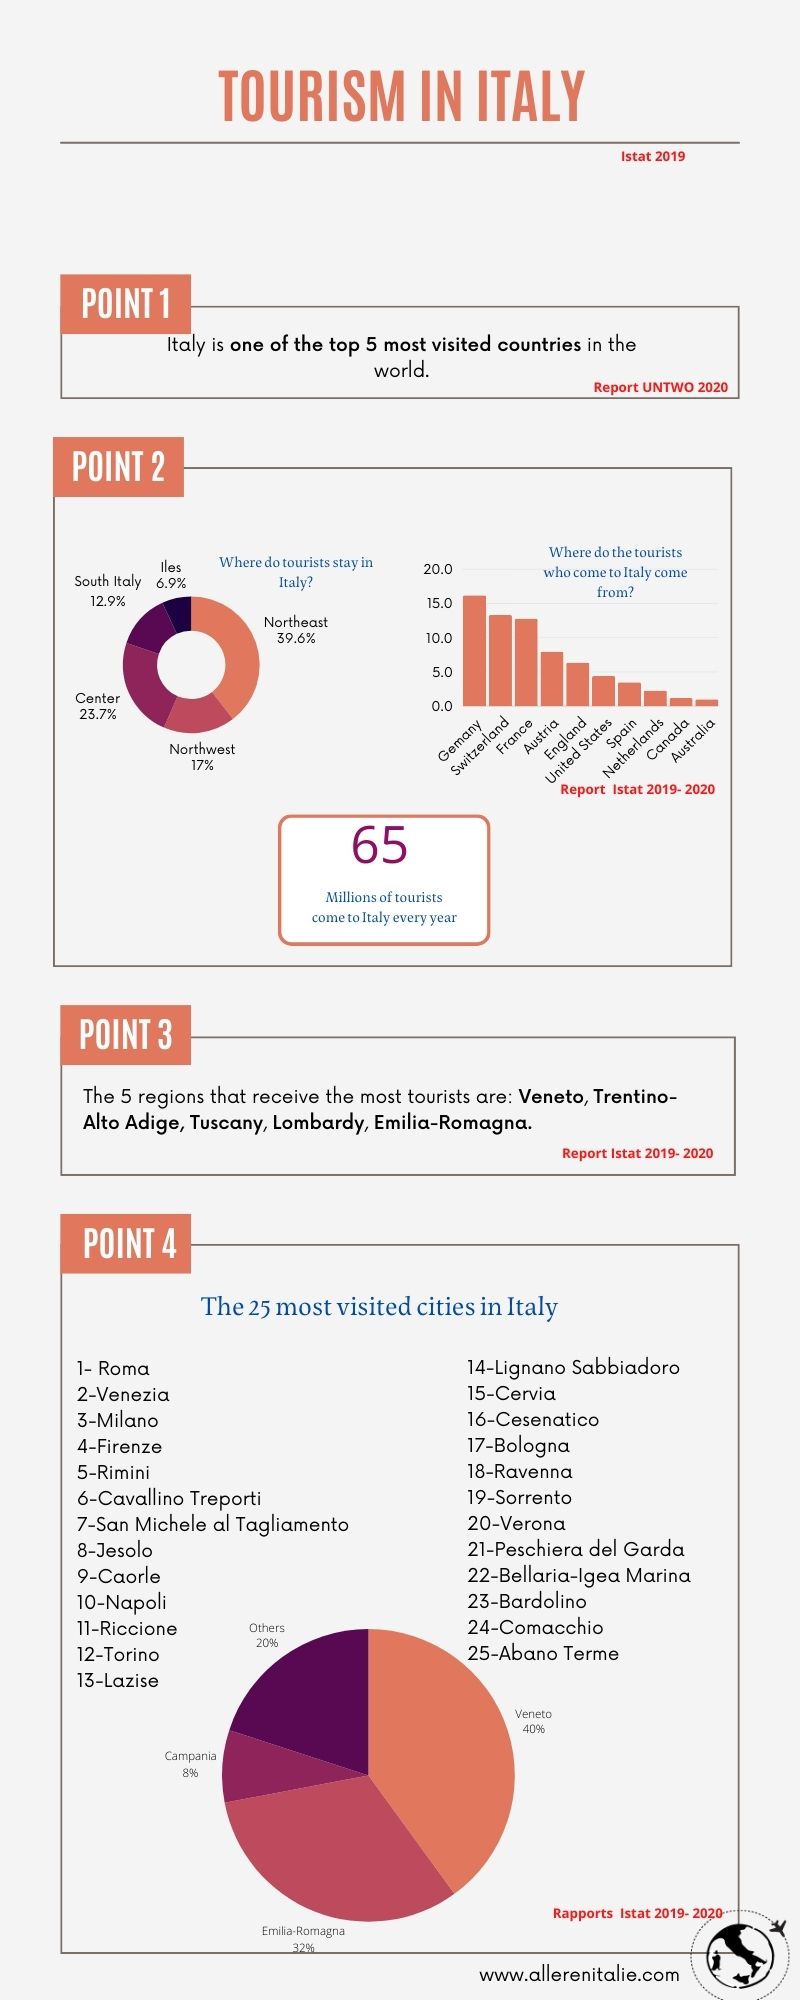 Tourism in Italy